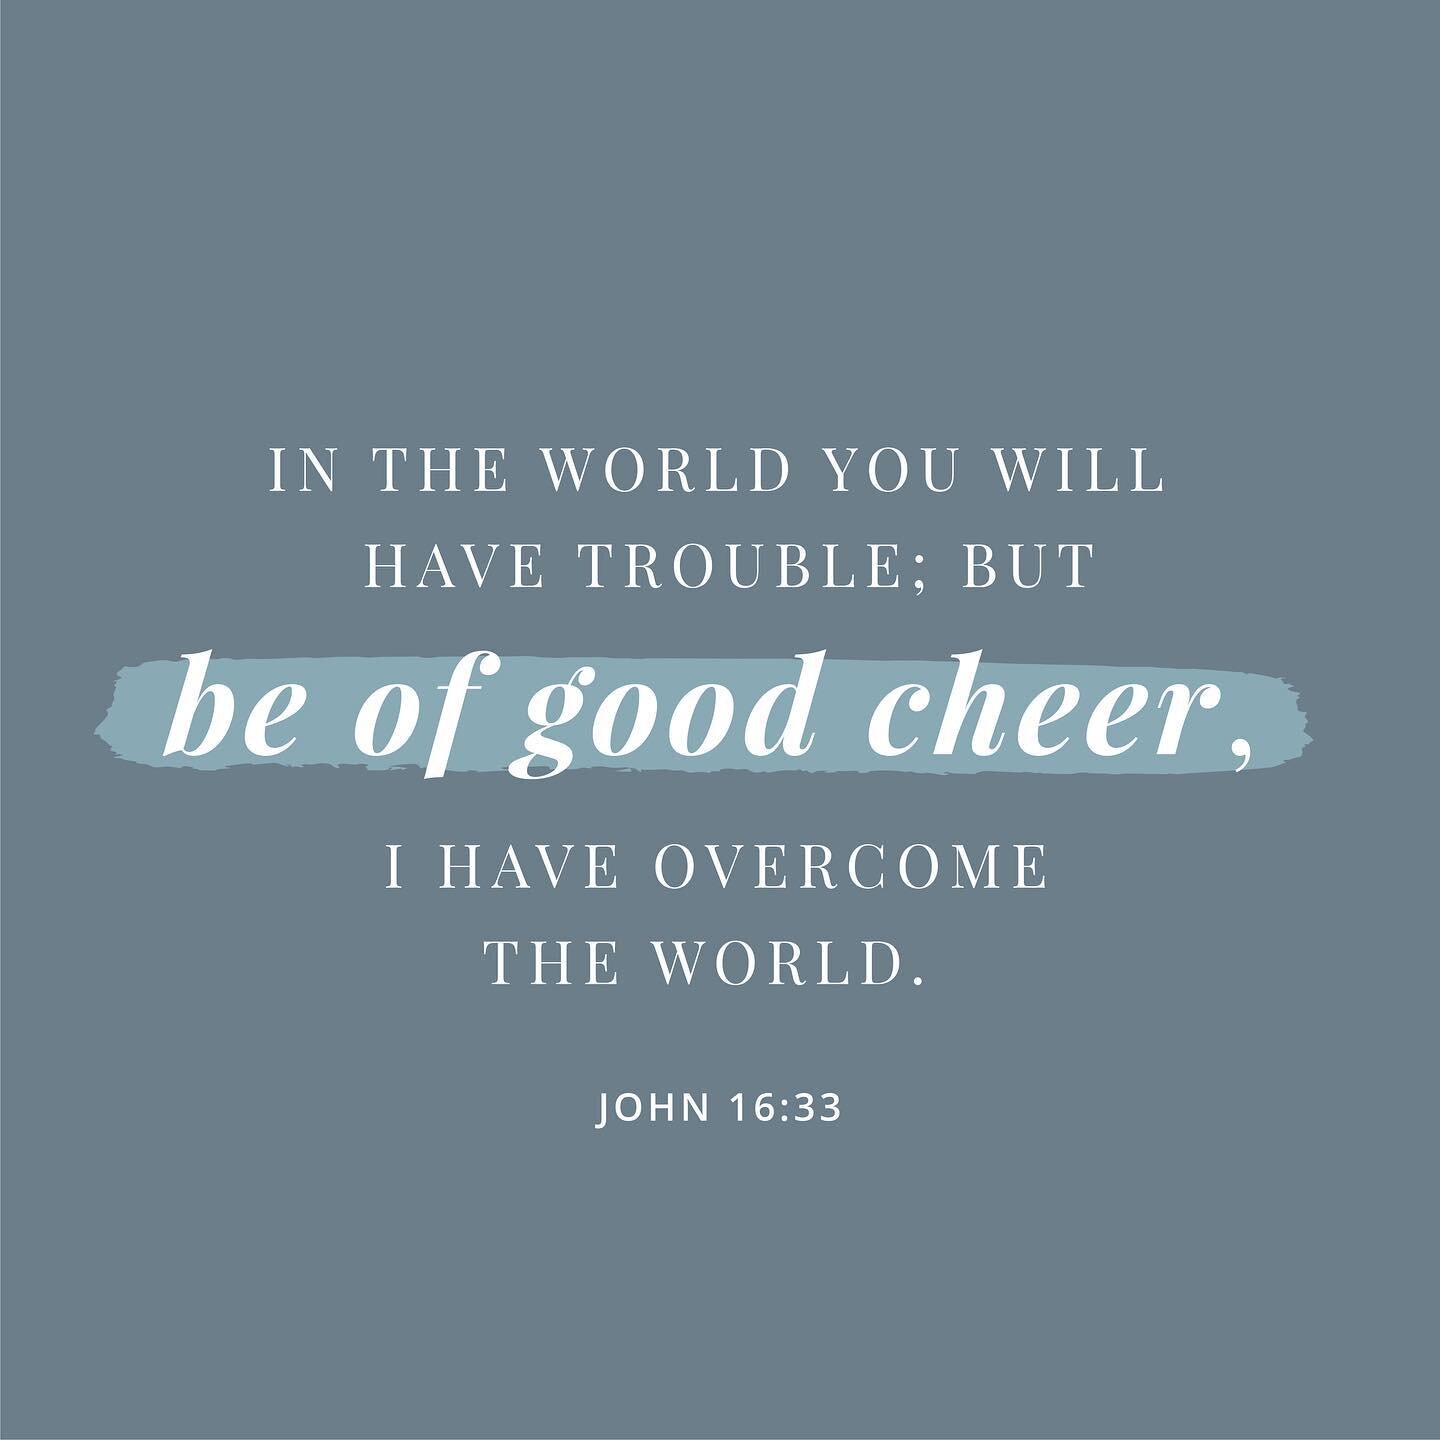 Jesus tells his disciples, &ldquo;you will have trouble, but be of good cheer. I have overcome the world.&rdquo; For years, this has been one of my favorite verses. It&rsquo;s meaning and significance have ebbed and flowed with the seasons of my life